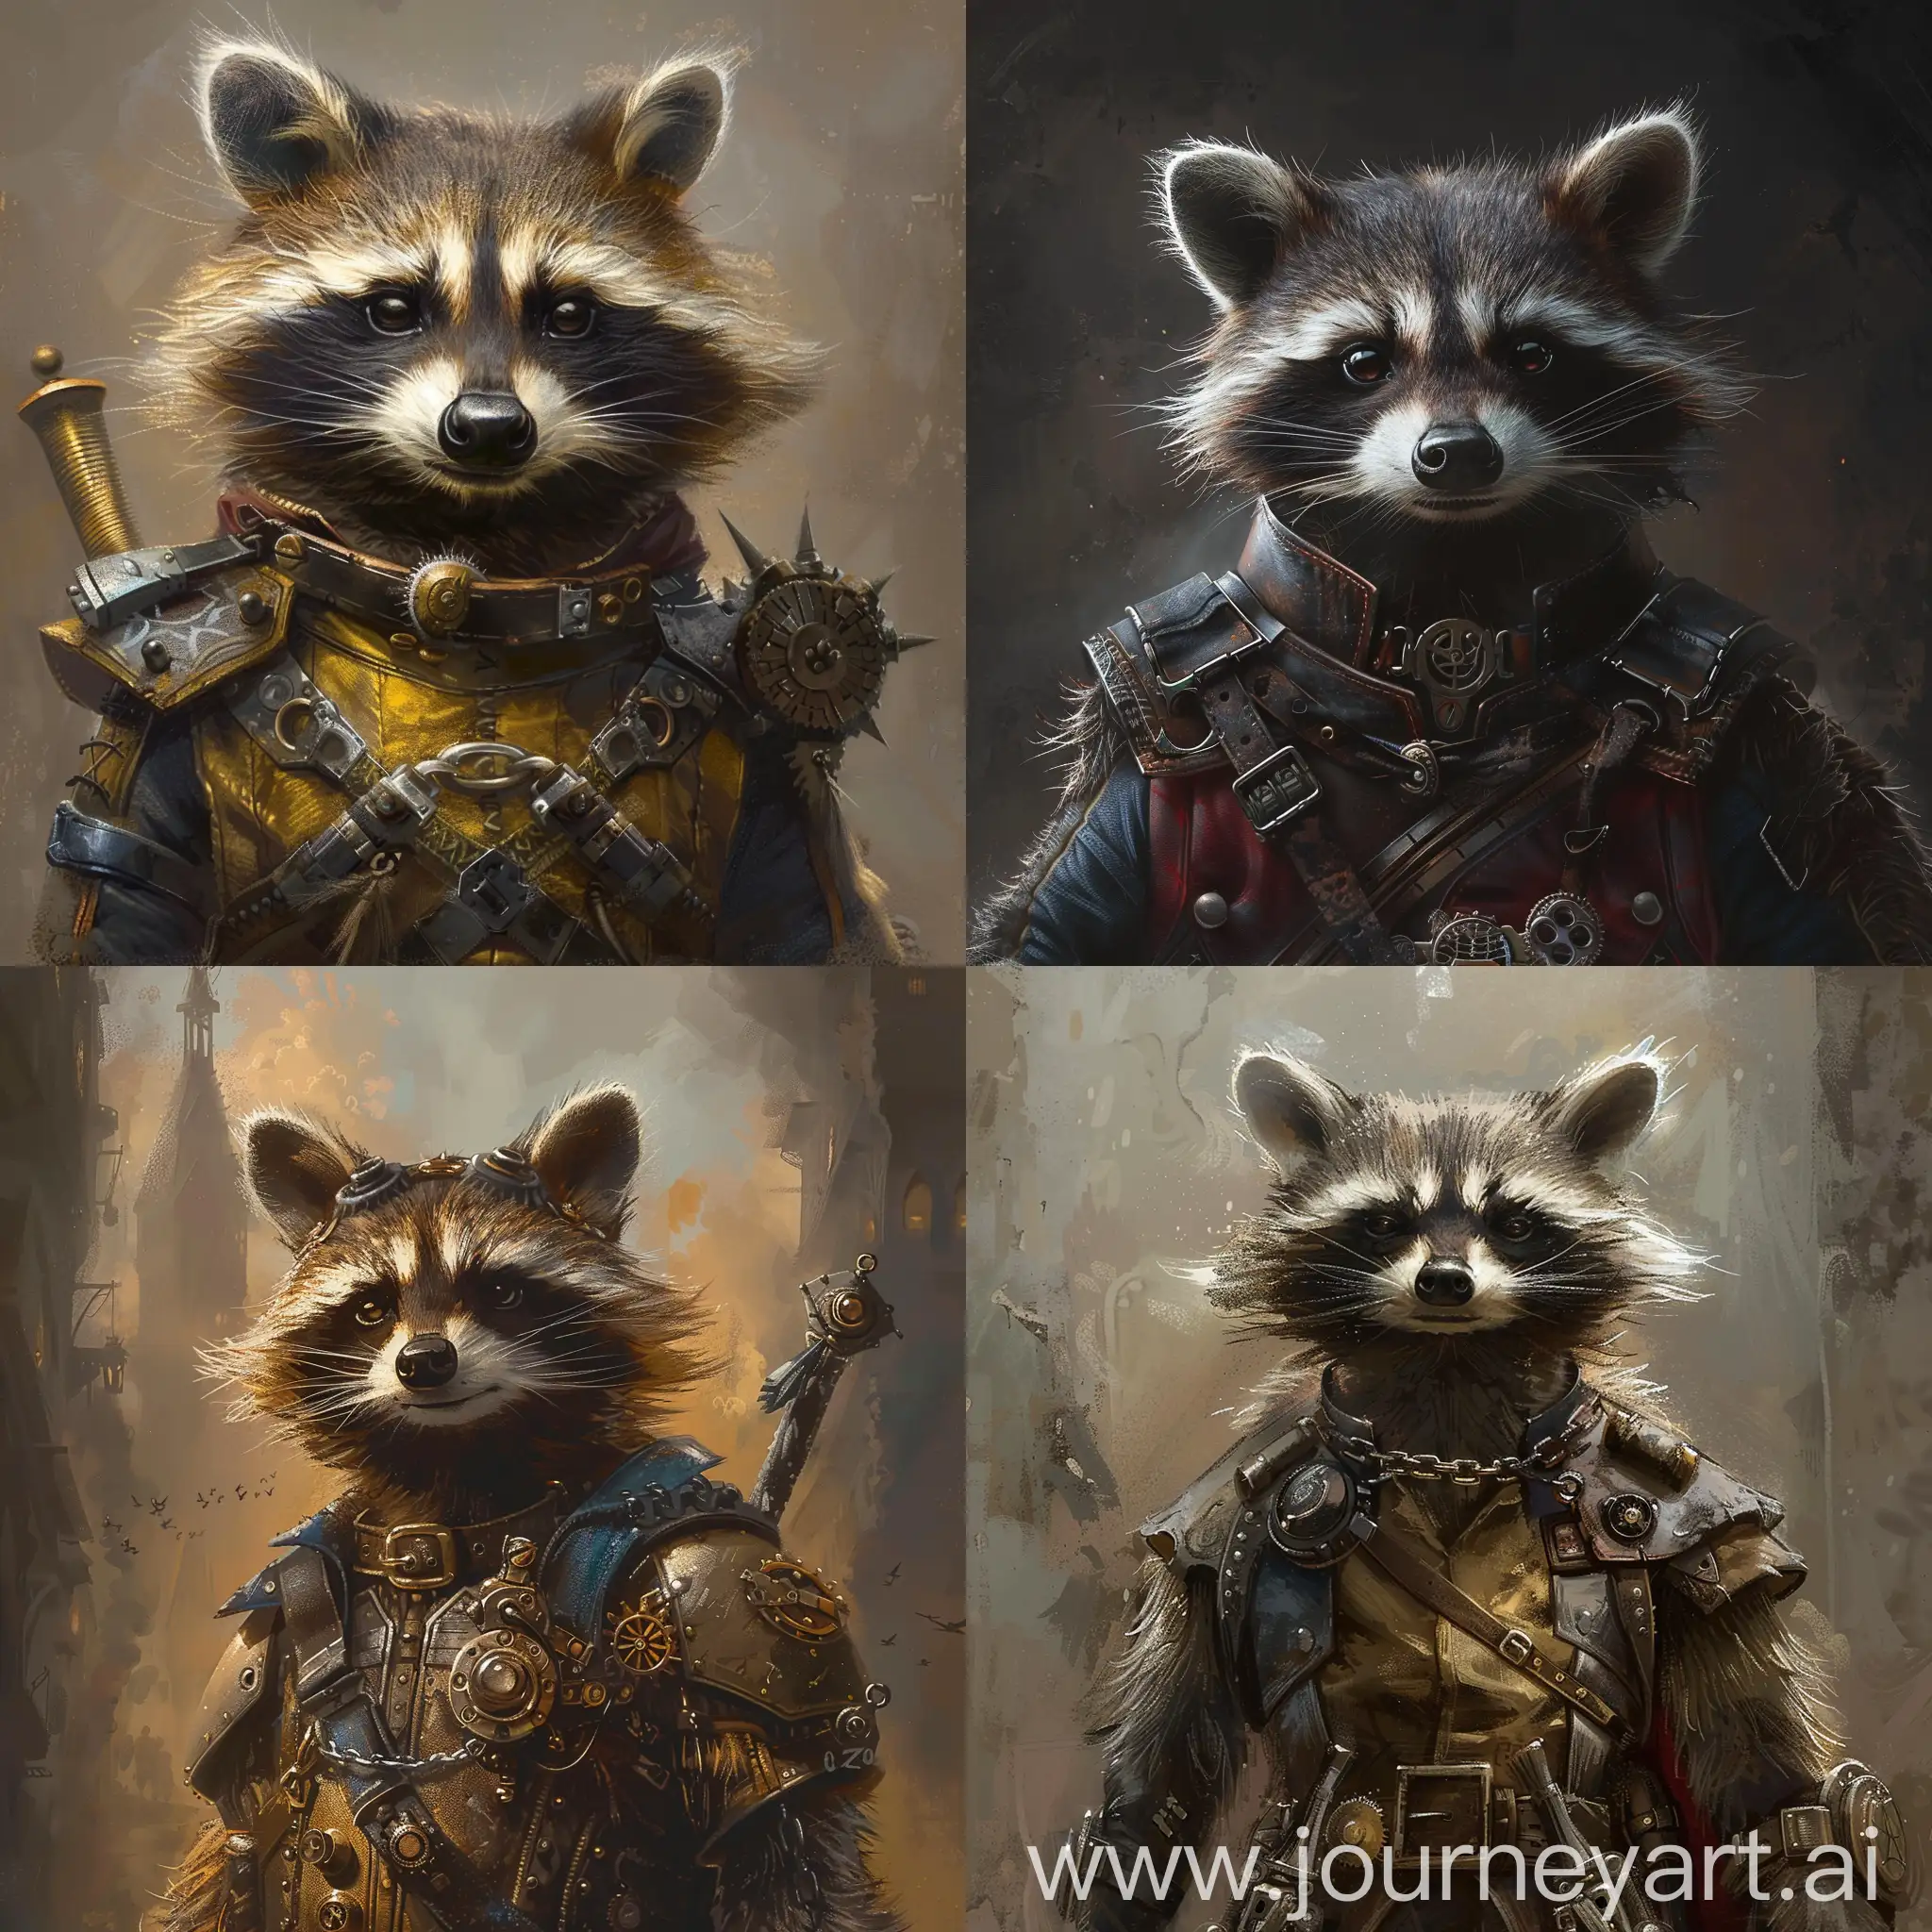 Steampunk-Medieval-Rocket-Raccoon-Intriguing-Fusion-of-RetroFuturistic-and-Historical-Elements